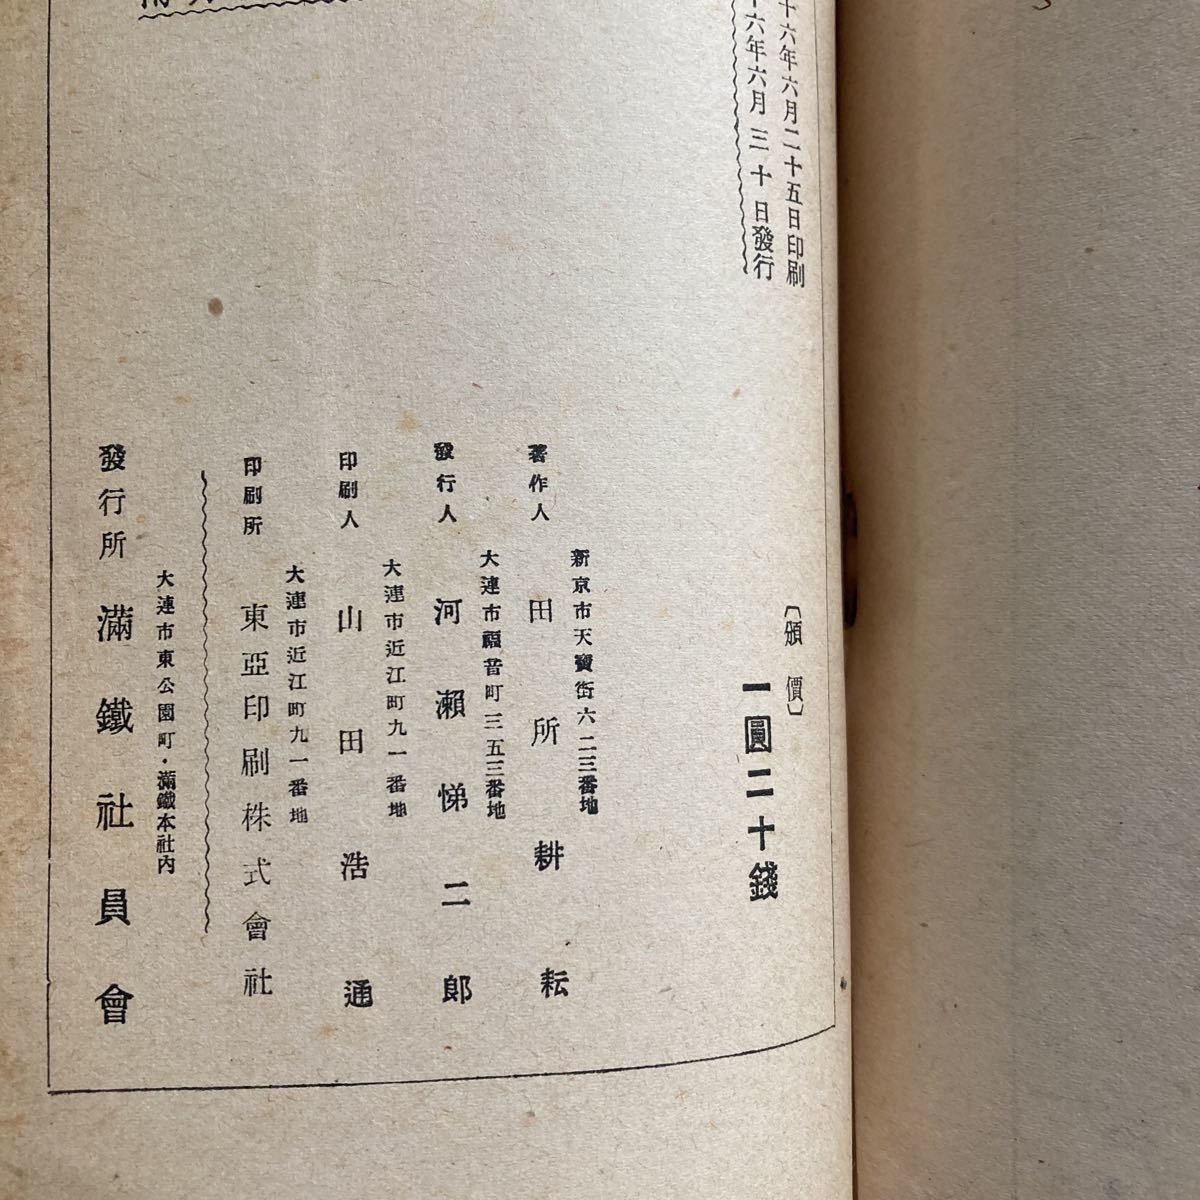 * free shipping * south person life line ... Ooshima -ply male rice field place .. also work full iron company member .. paper 50 Showa era 16 year!GM614